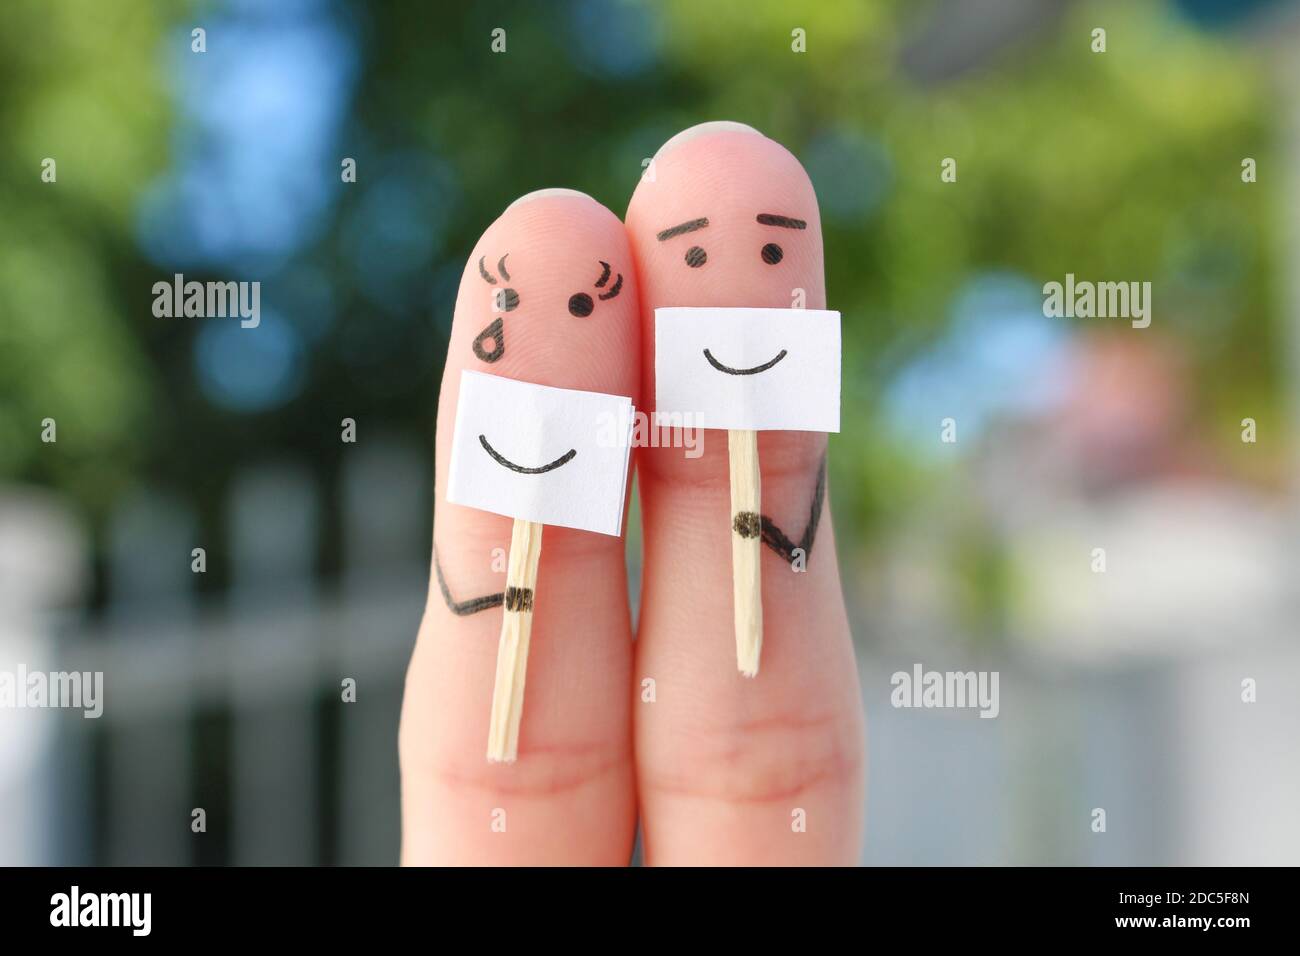 Fingers art of couple. Concept of people hiding emotions. Stock Photo